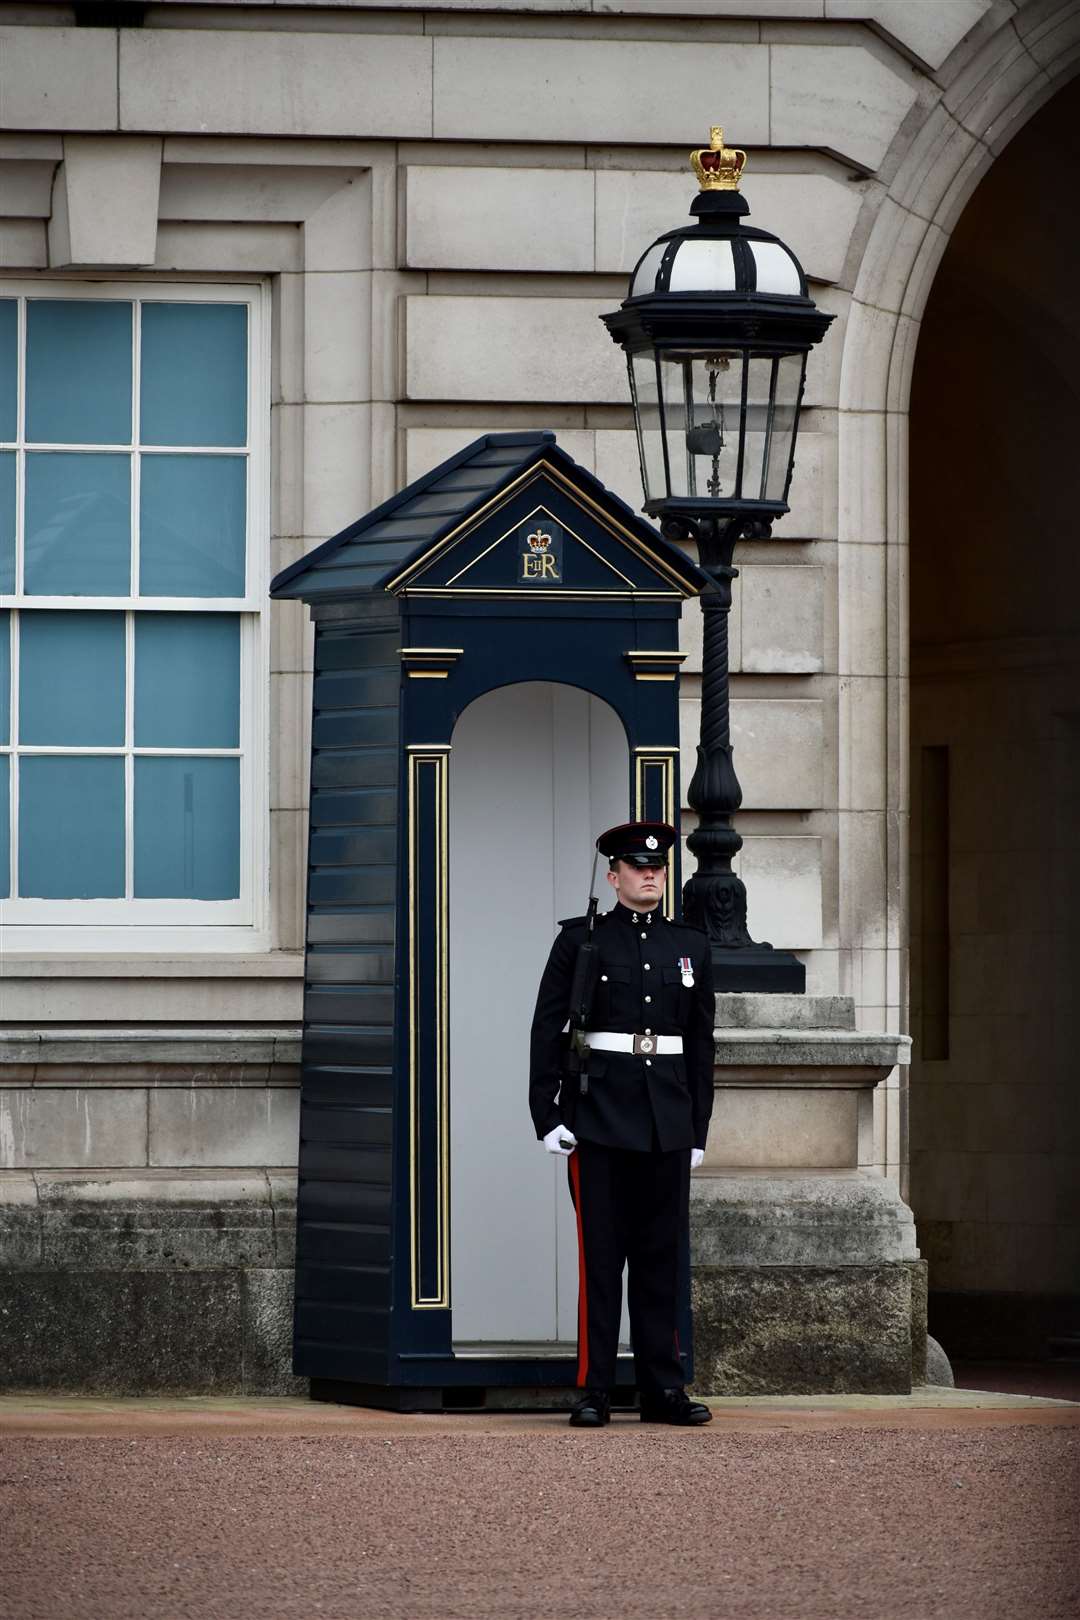 A soldier from 34 Fd Sqn in a sentry box guarding Buckingham Palace.